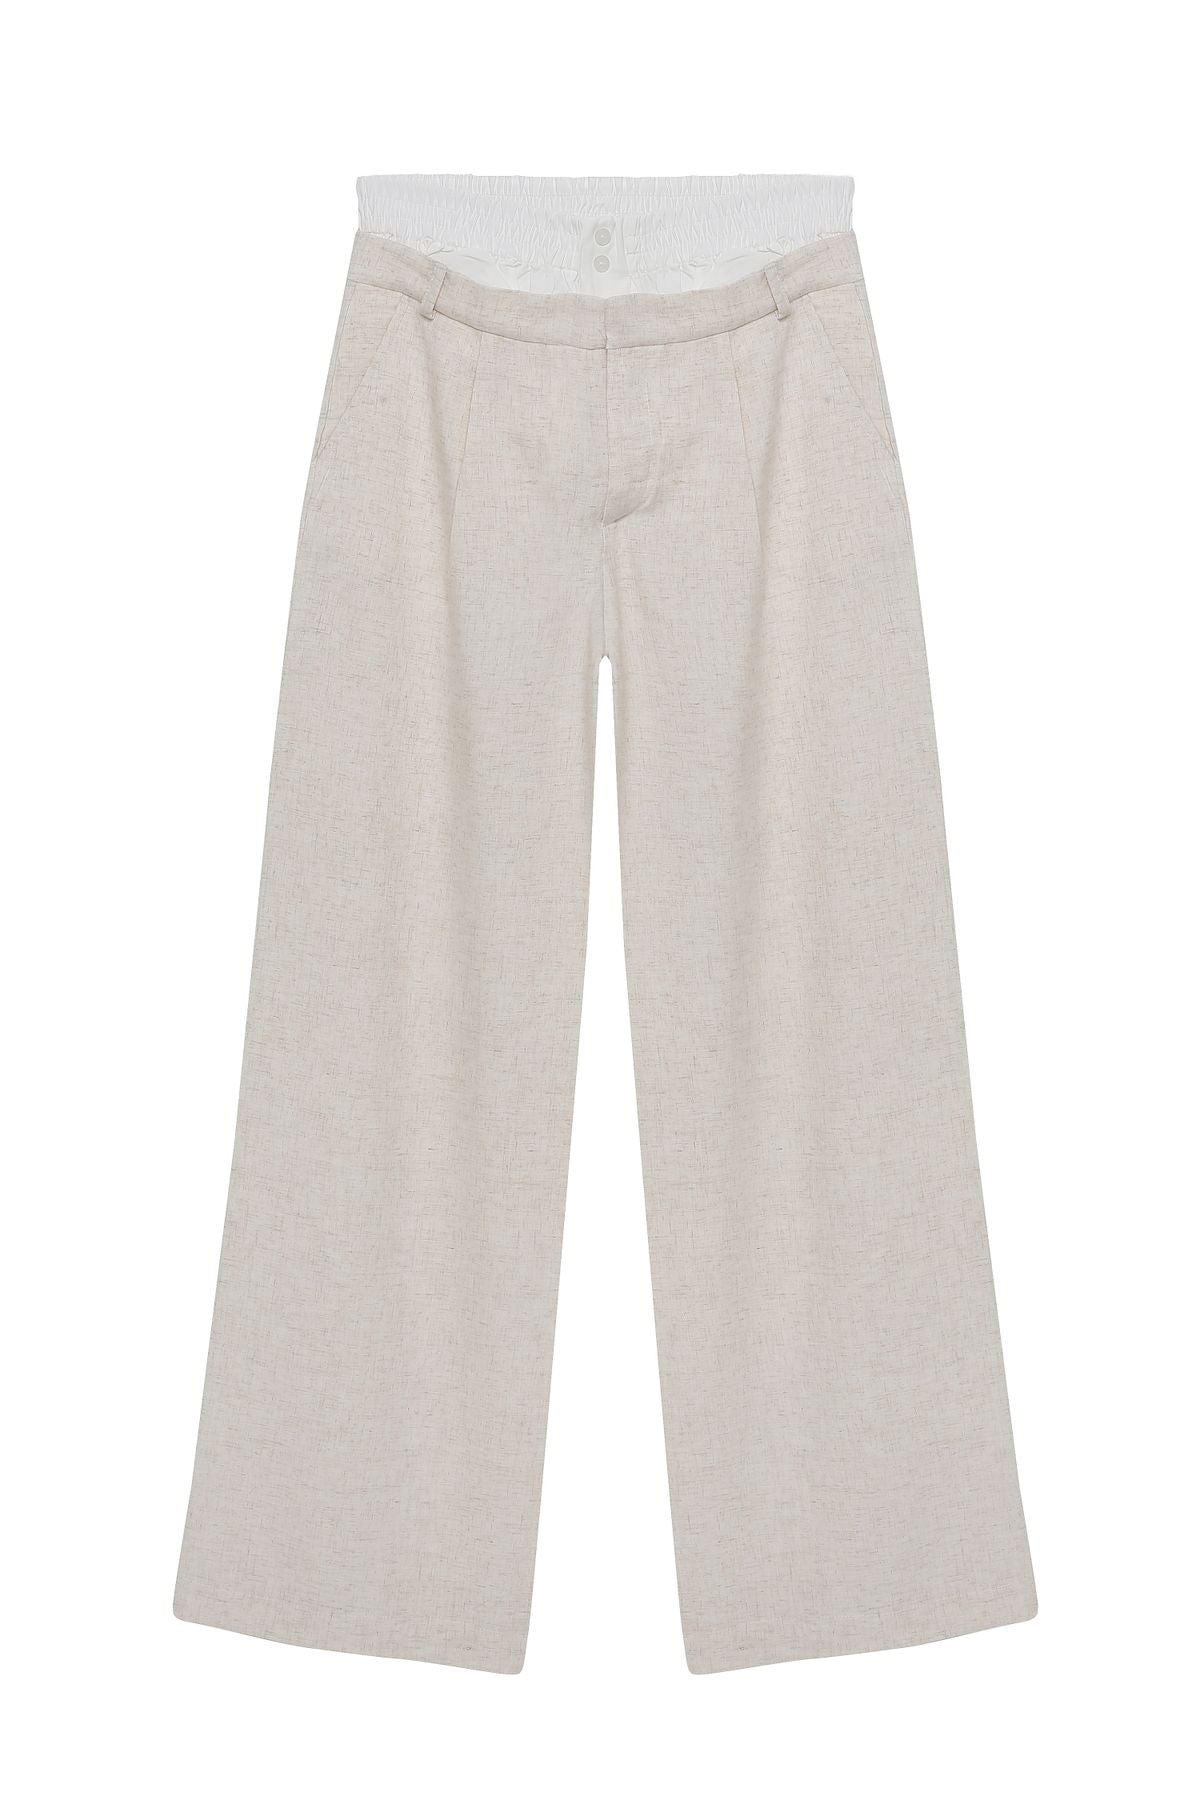 Waist Detailed Linen Palazzo Trousers Natural